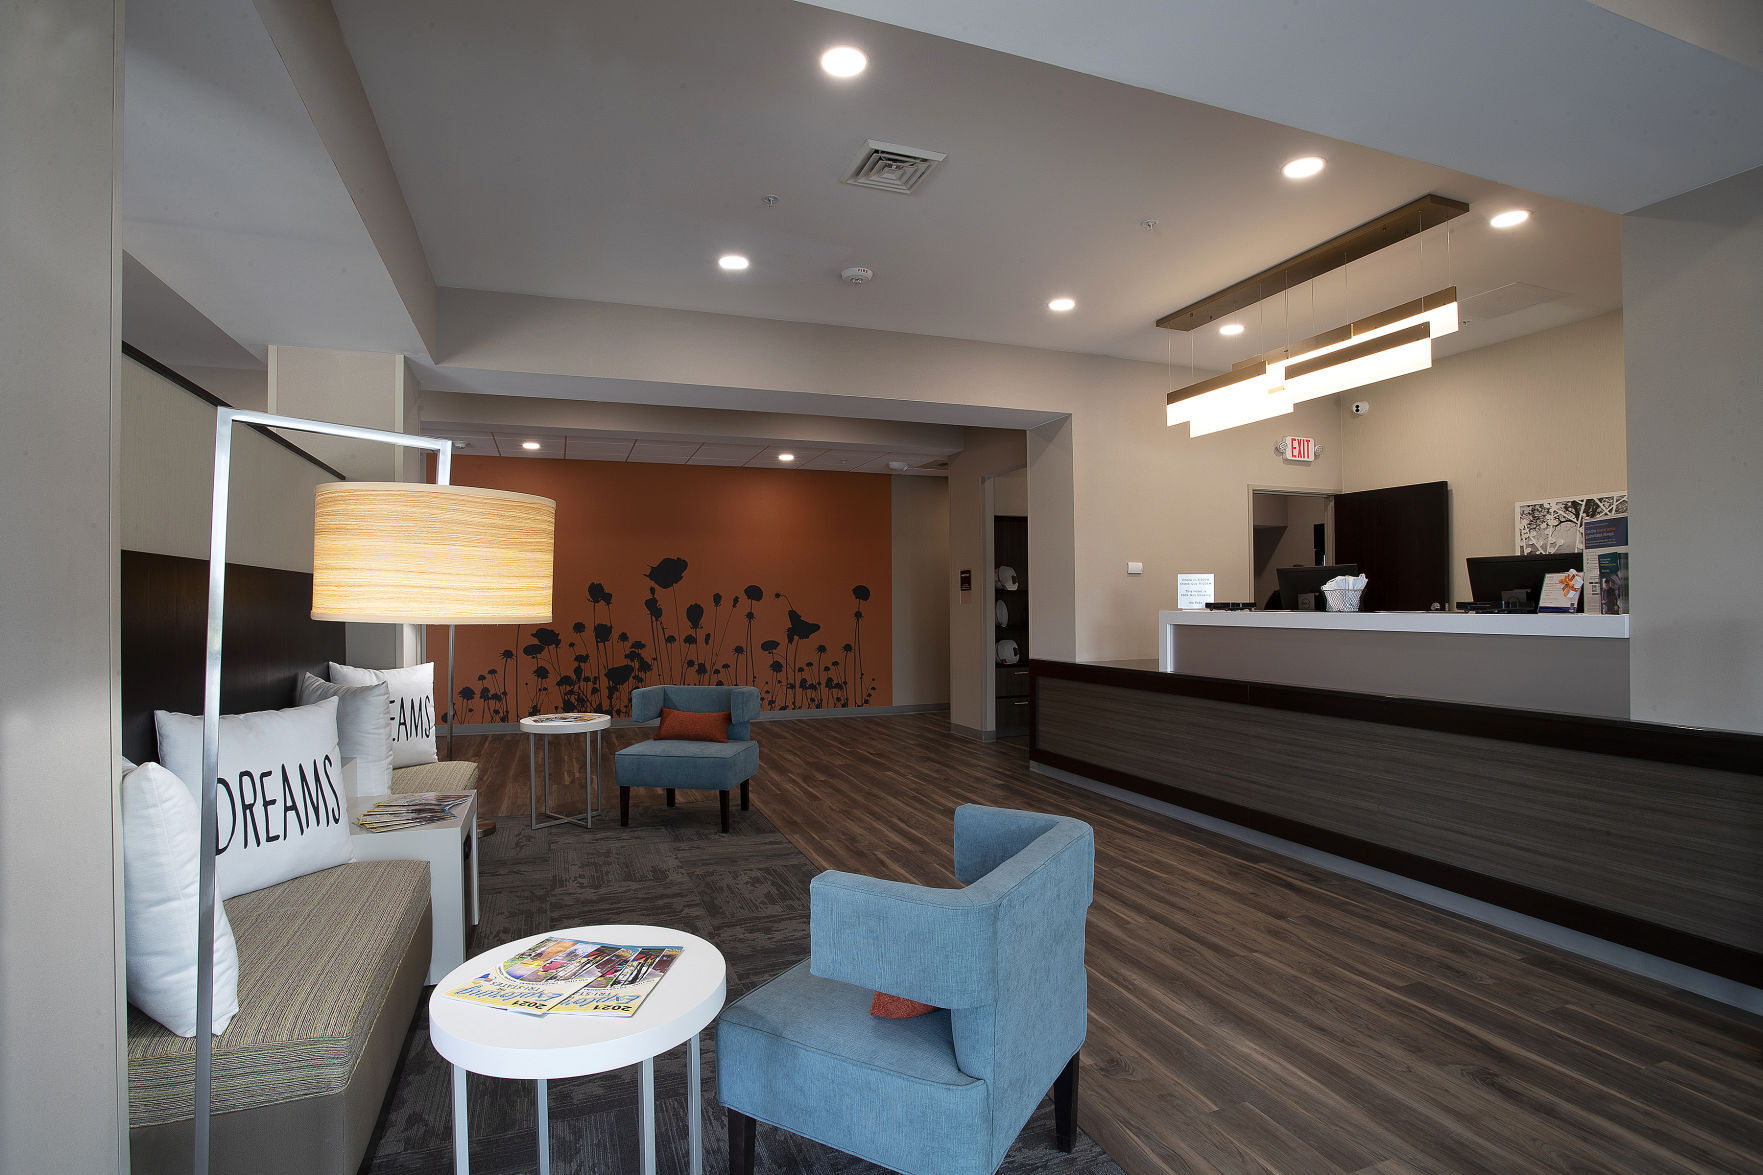 The entry and front desk area of the new Sleep Inn & Suites in Lancaster, Wis. PHOTO CREDIT: Stephen Gassman